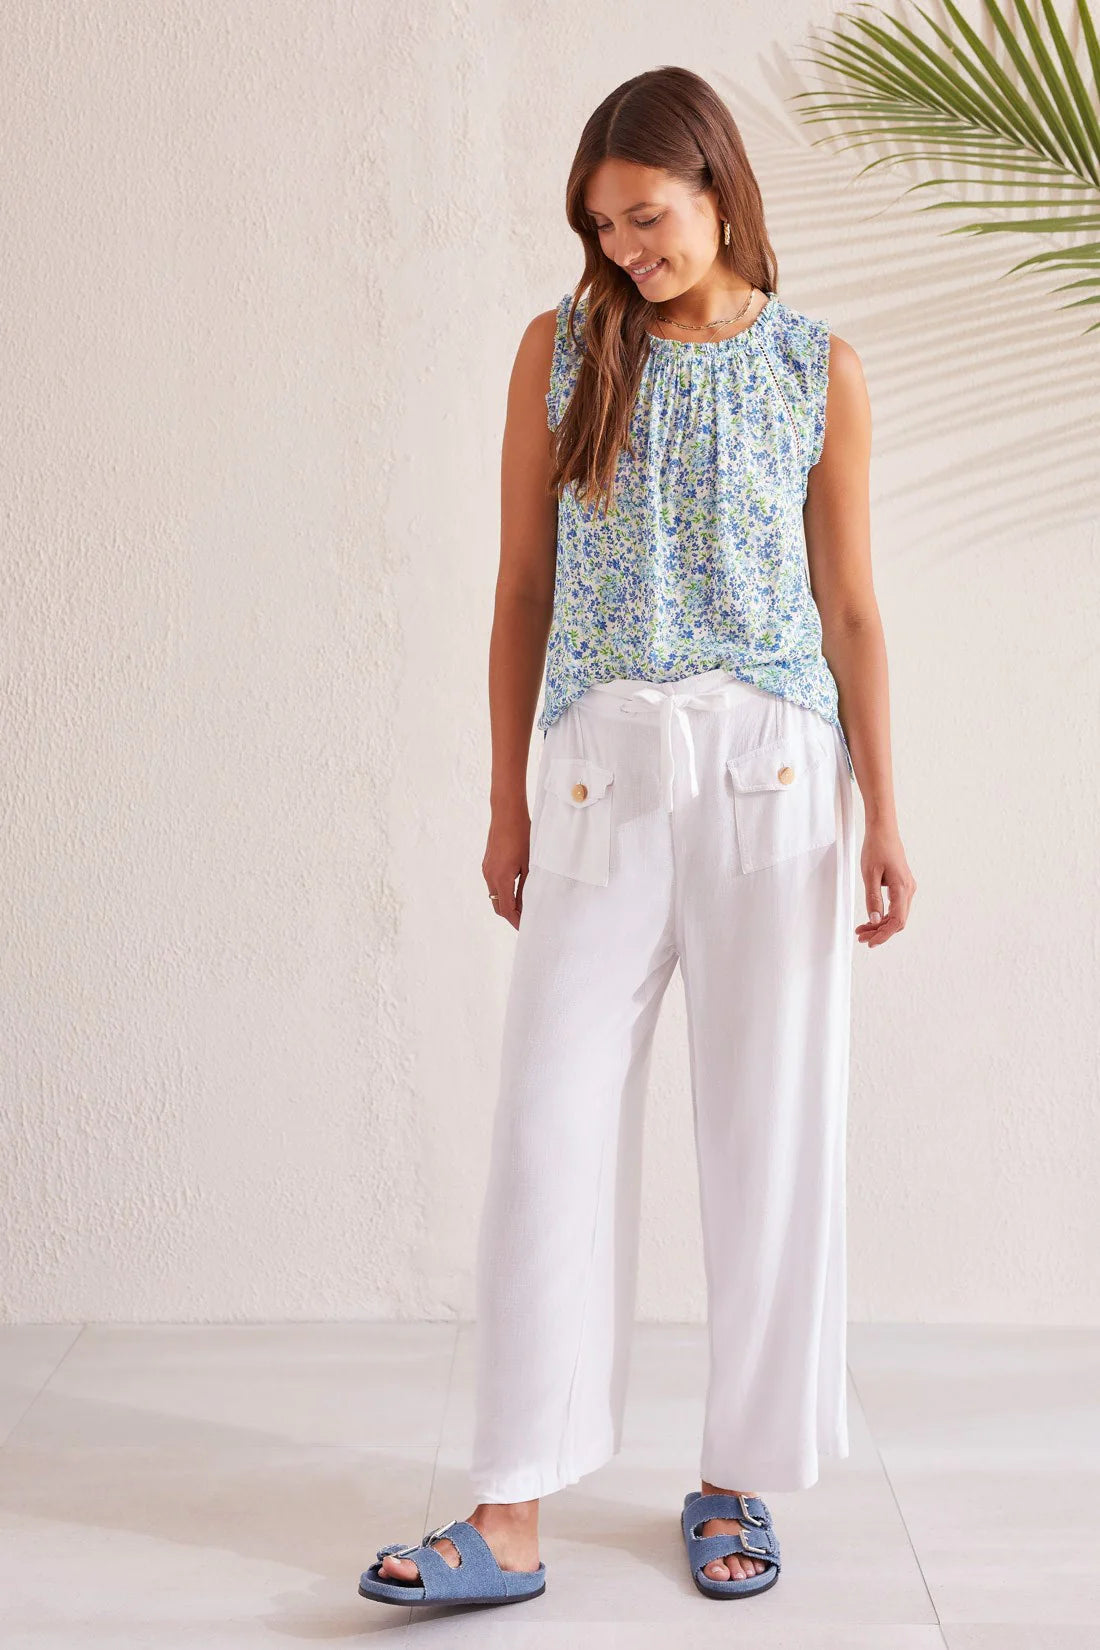 Designed with a fresh floral print, this sleeveless blouse takes your style to centerstage. We love the frilled edge at the neckline and armholes, crochet trim at the yoke, and lightweight jacquard fabric that feels airy all day long.